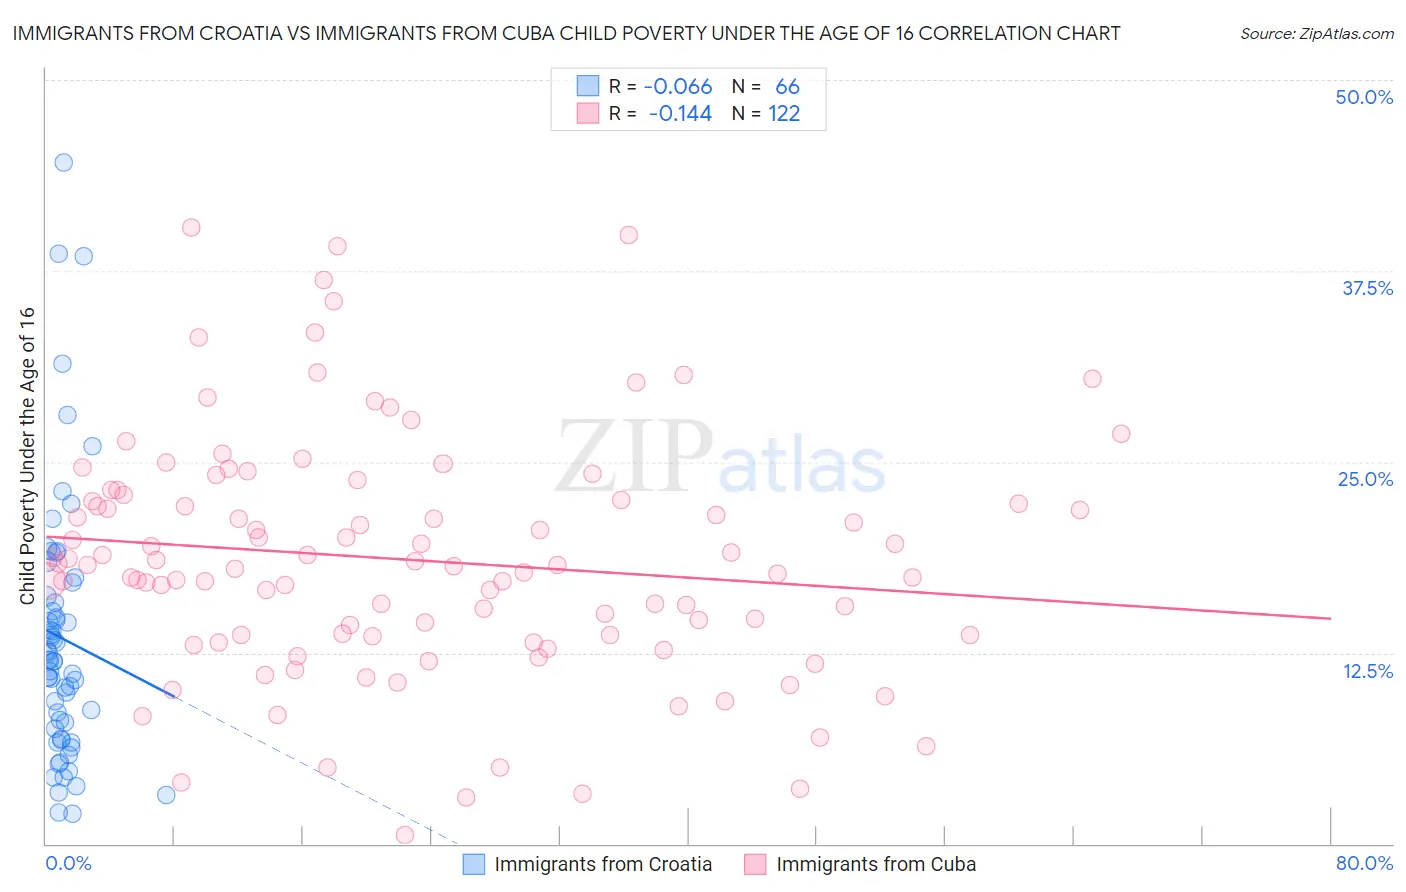 Immigrants from Croatia vs Immigrants from Cuba Child Poverty Under the Age of 16